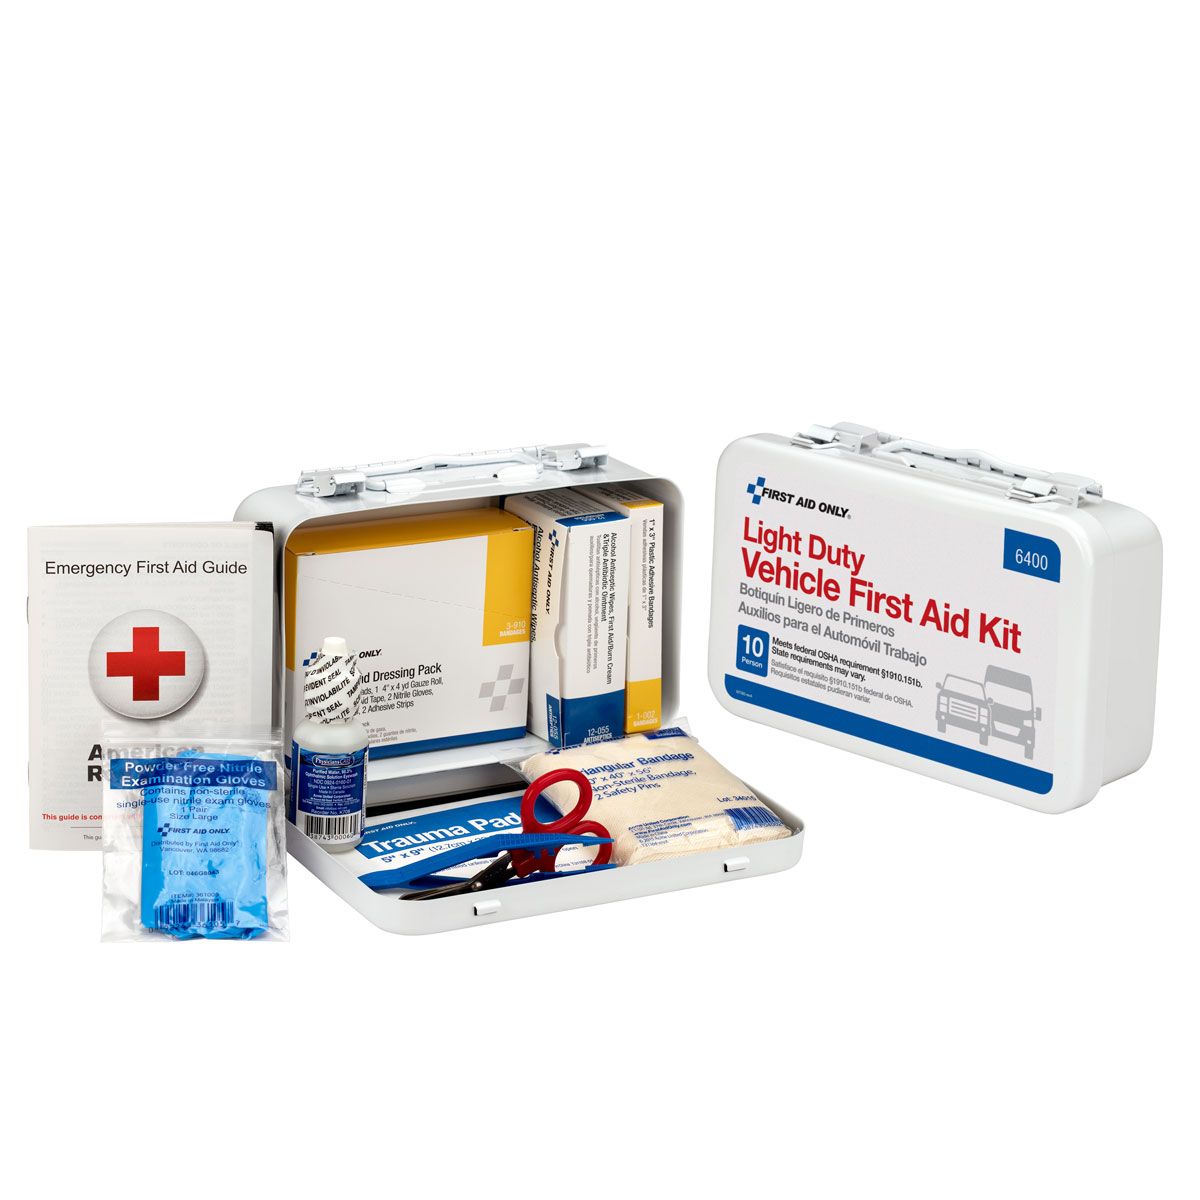 10 Person Vehicle First Aid Kit, Weatherproof Steel Case - W-6400